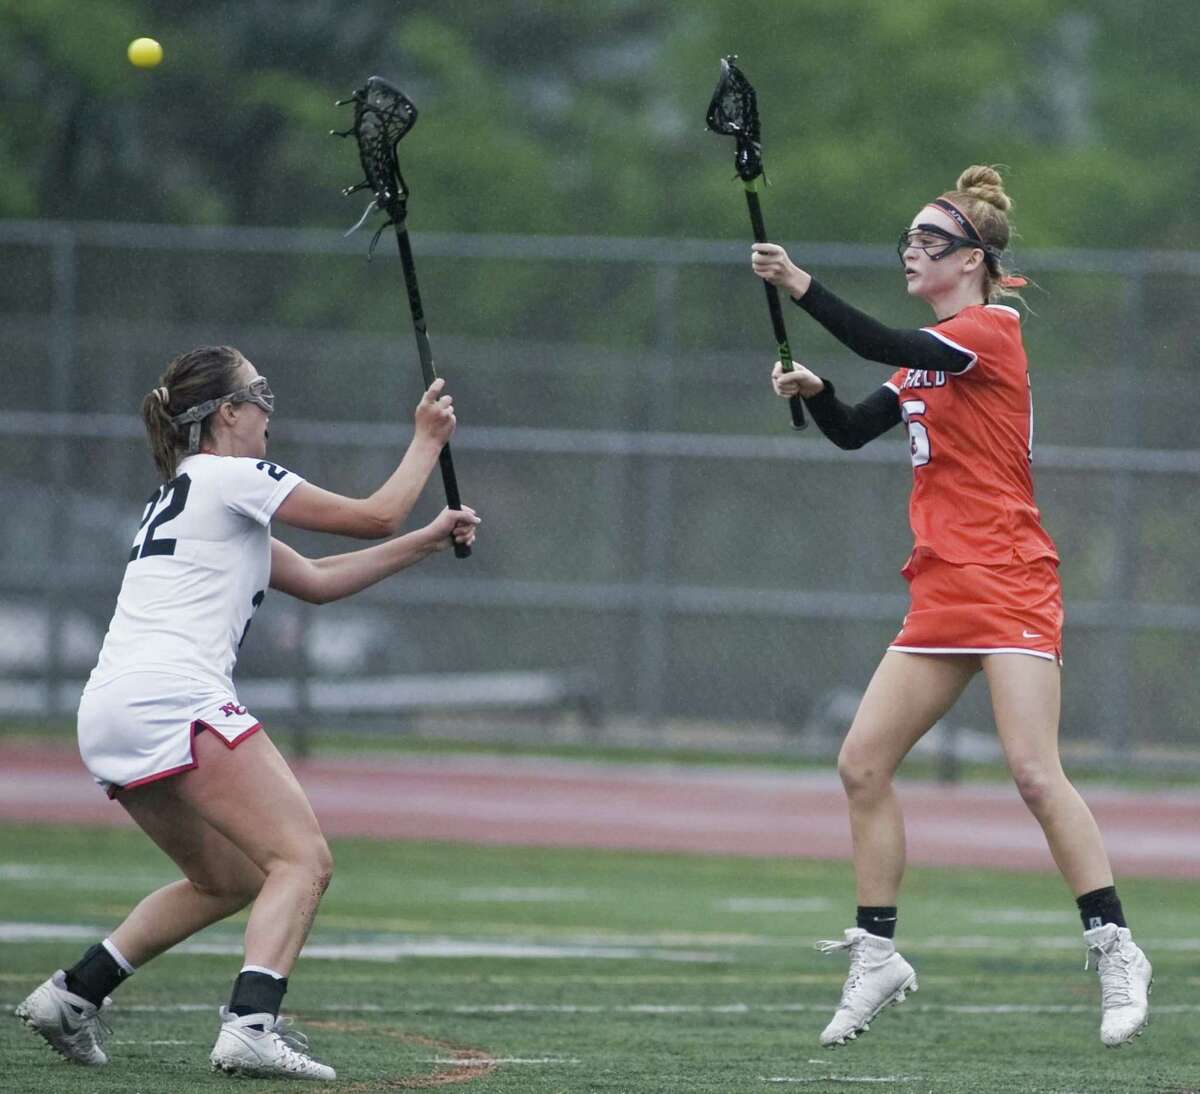 New Canaan High School’s Caroline Schuh tries to block the pass of Ridgefield High School’s Caeleigh Tannian in the FCIAC girls lacrosse semifinals played at Norwalk High School on Monday. Ridgefield upset New Canaan, 14-11.